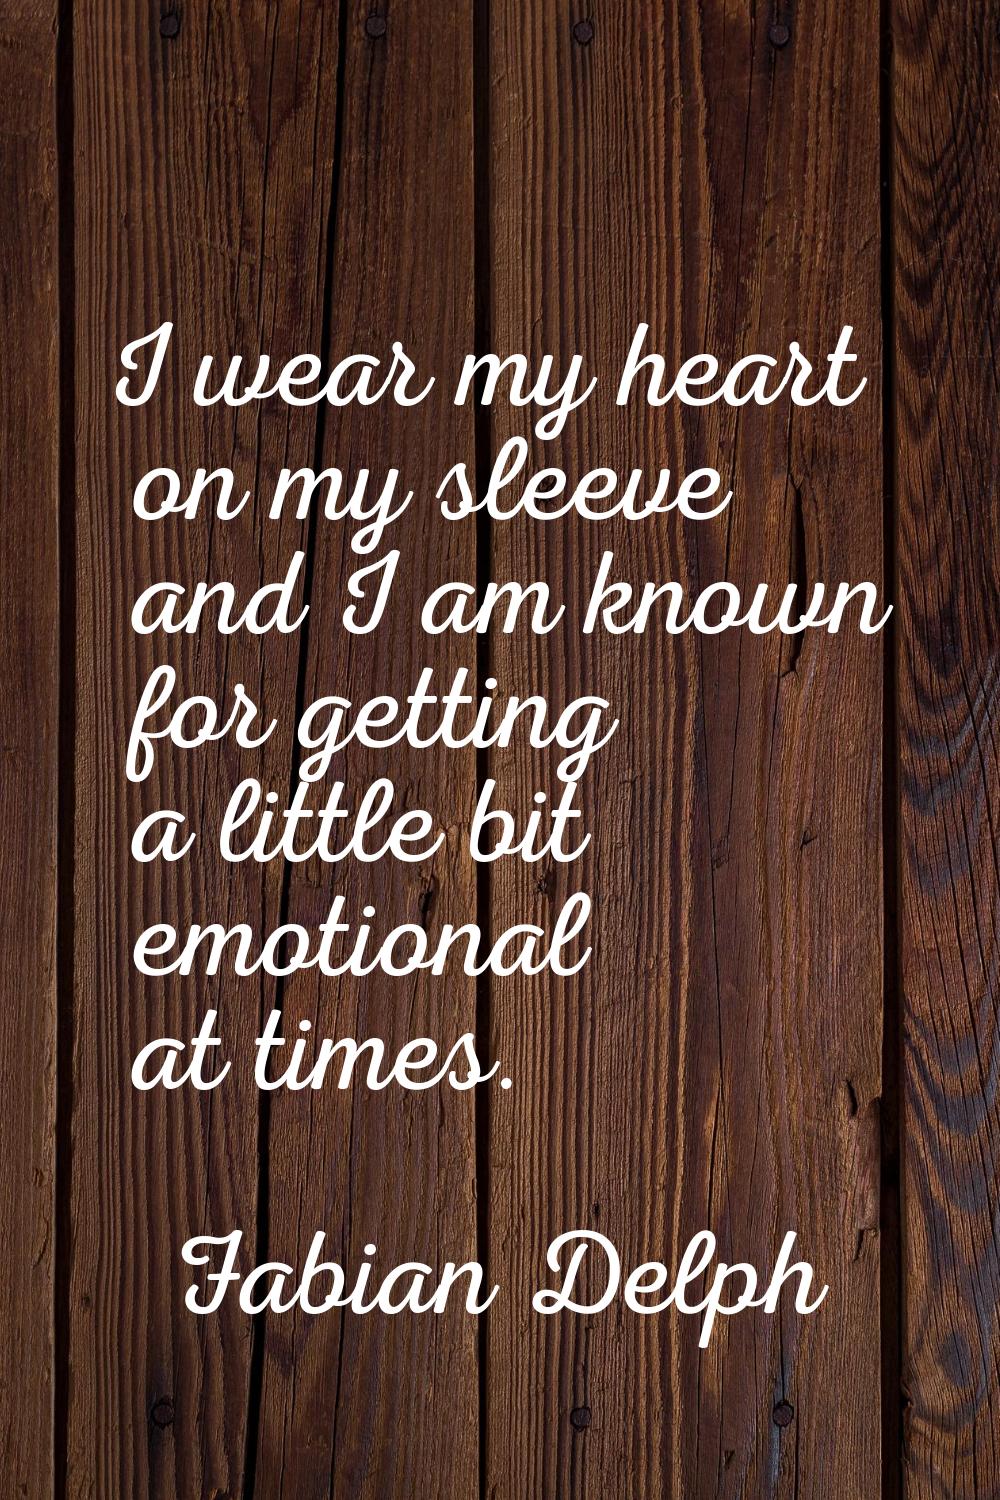 I wear my heart on my sleeve and I am known for getting a little bit emotional at times.